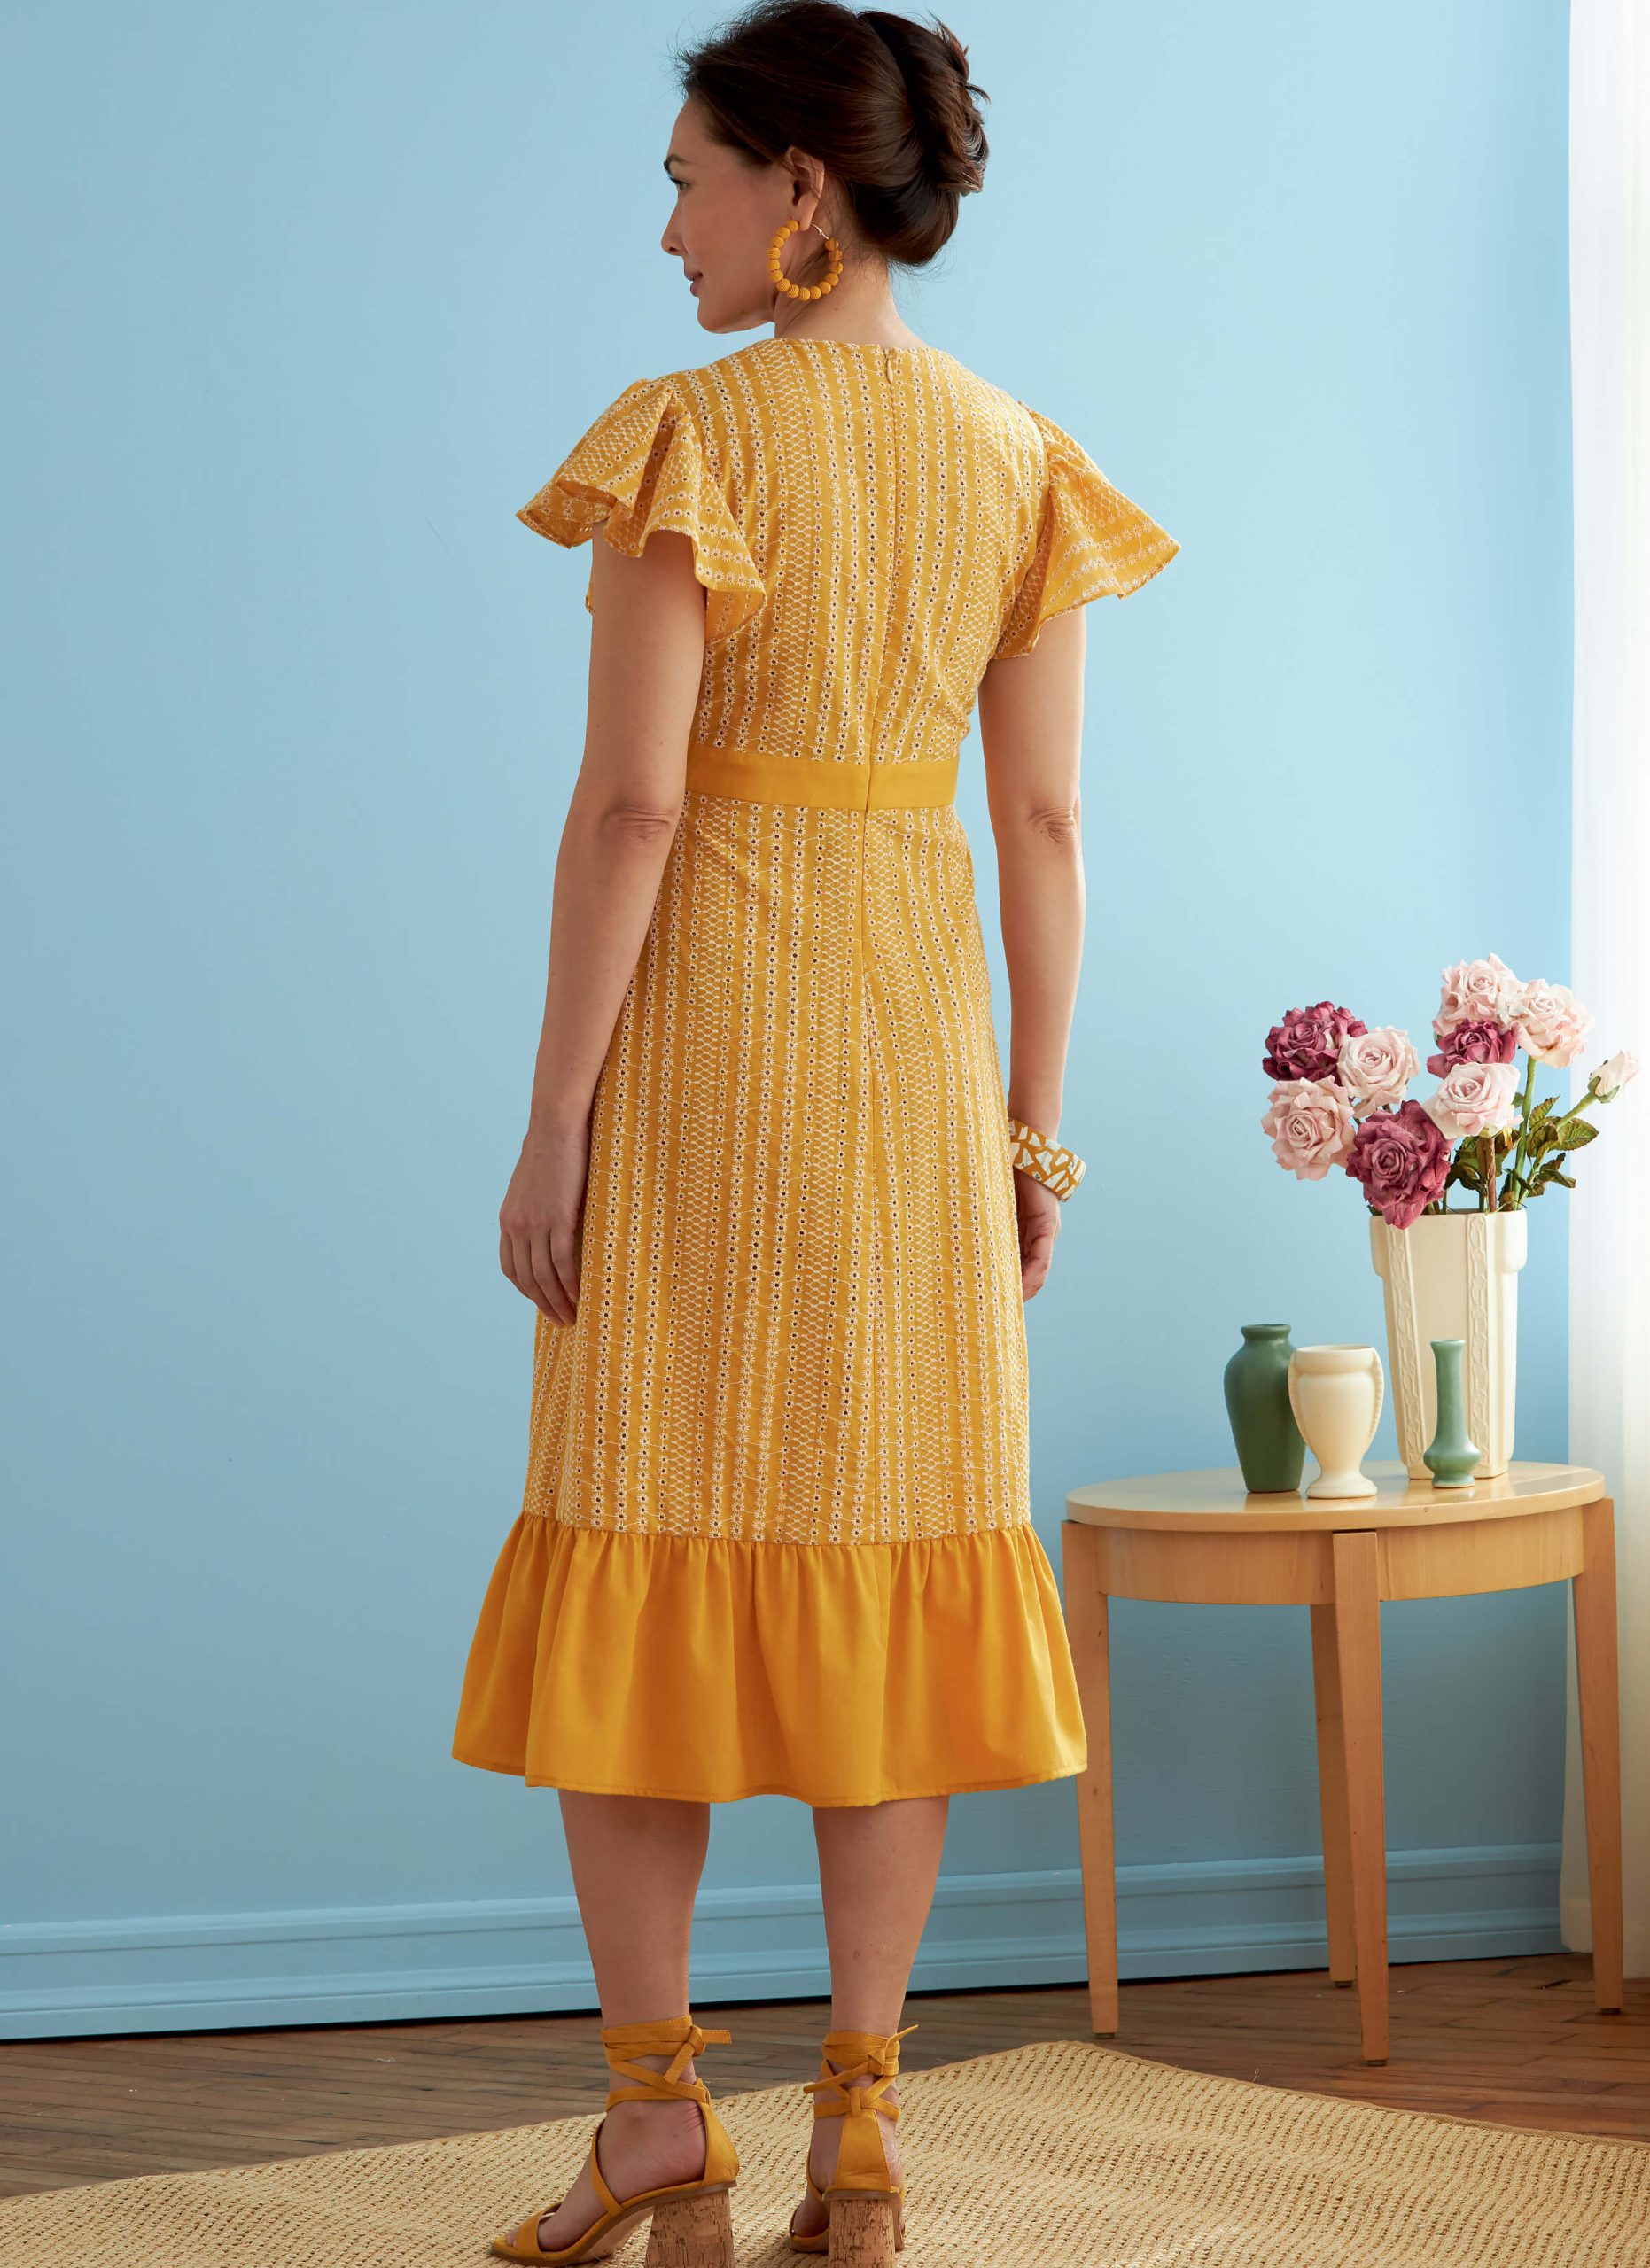 Butterick Sewing Pattern B6728 Misses' Dresses